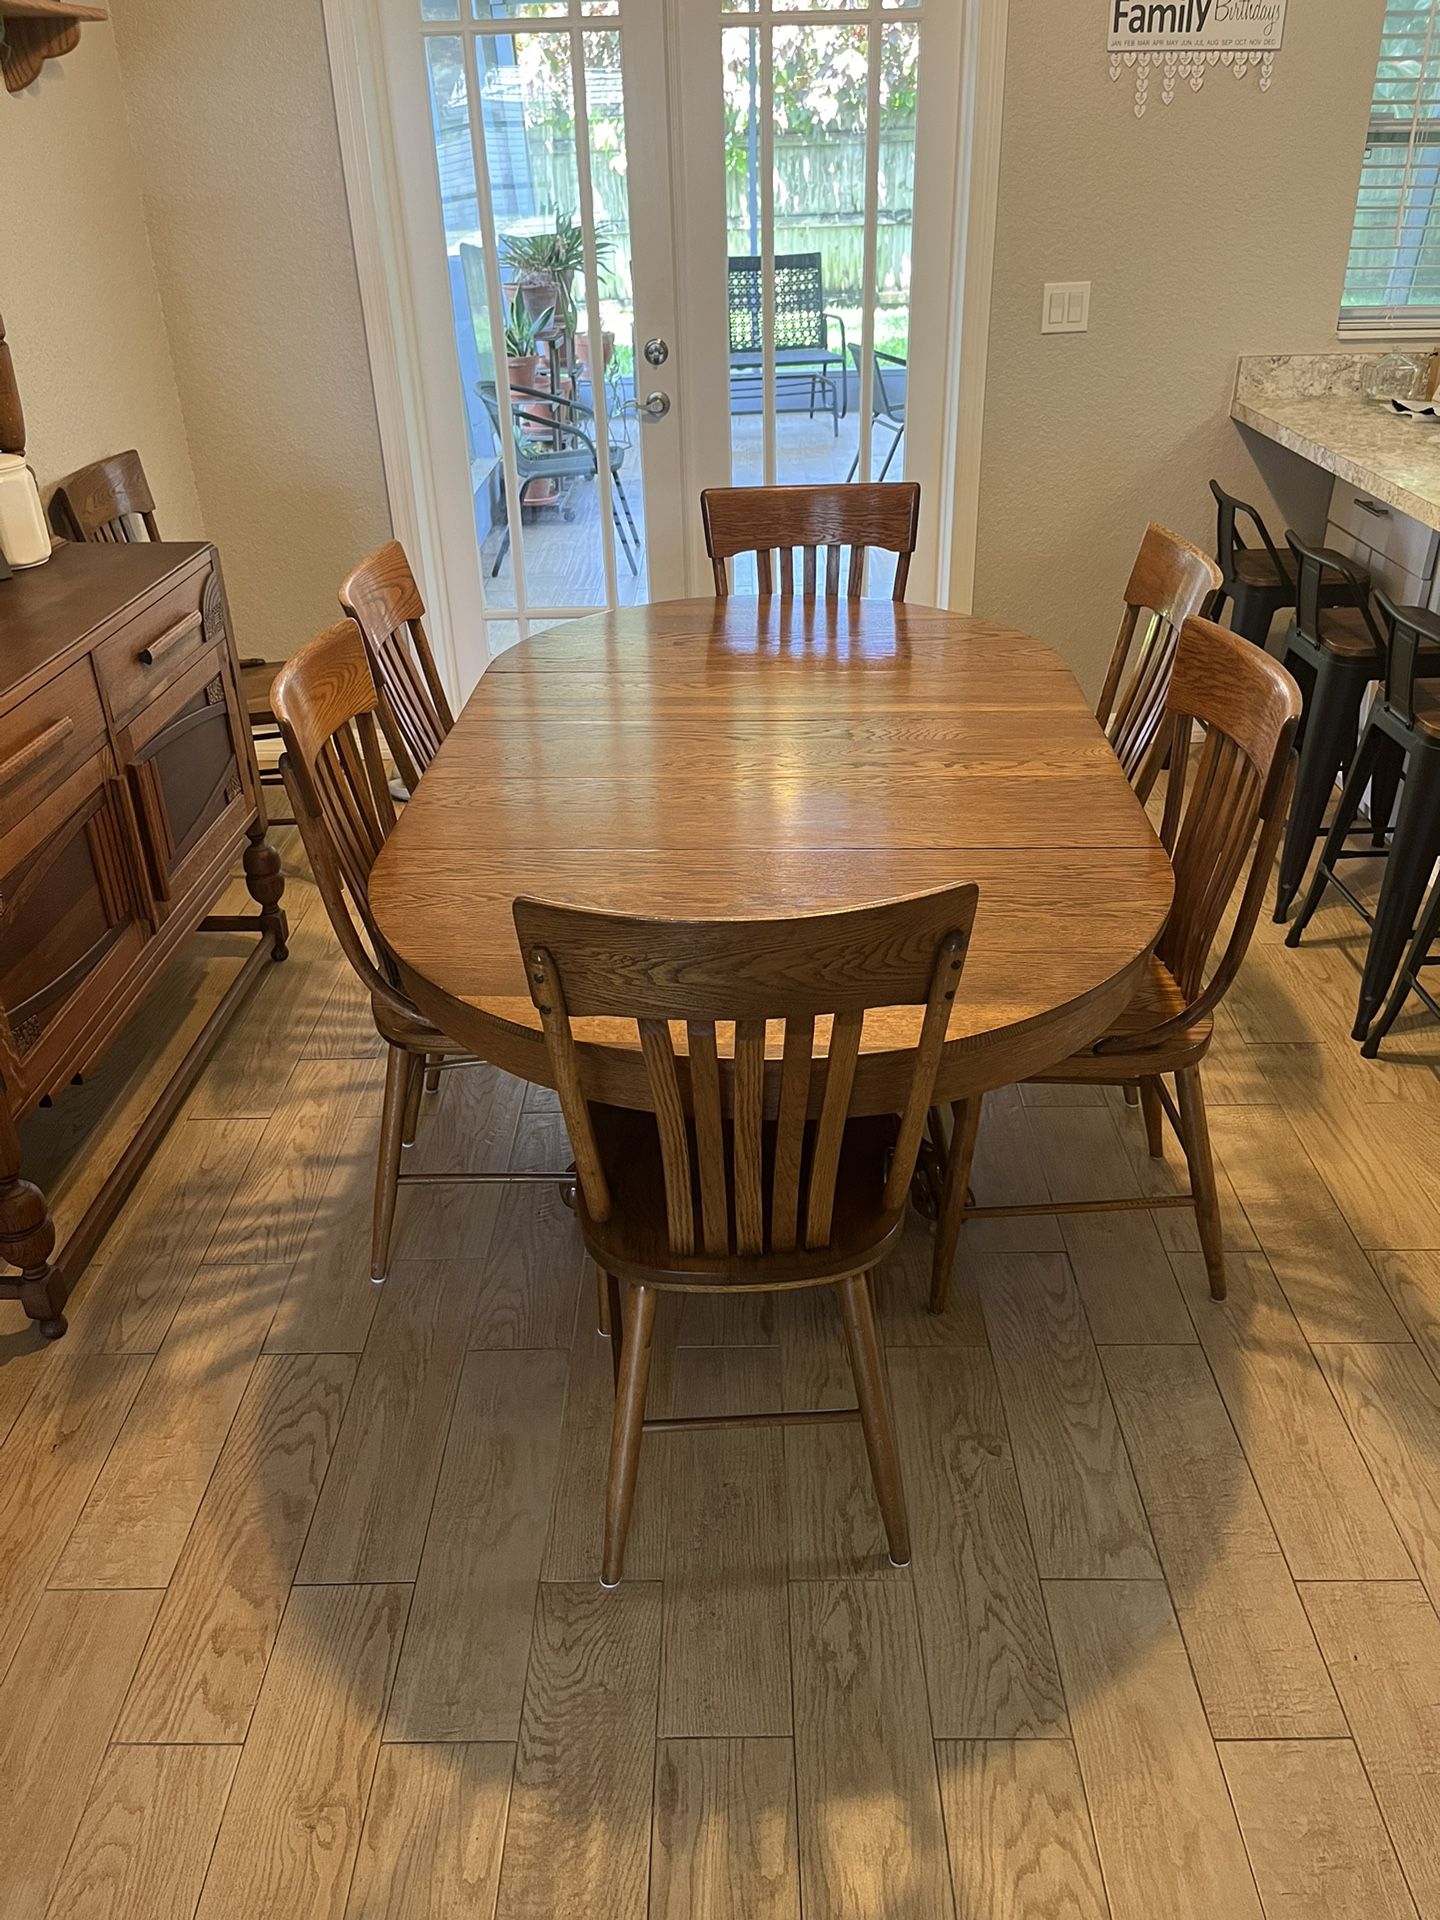 Wood Dining Table And Chairs